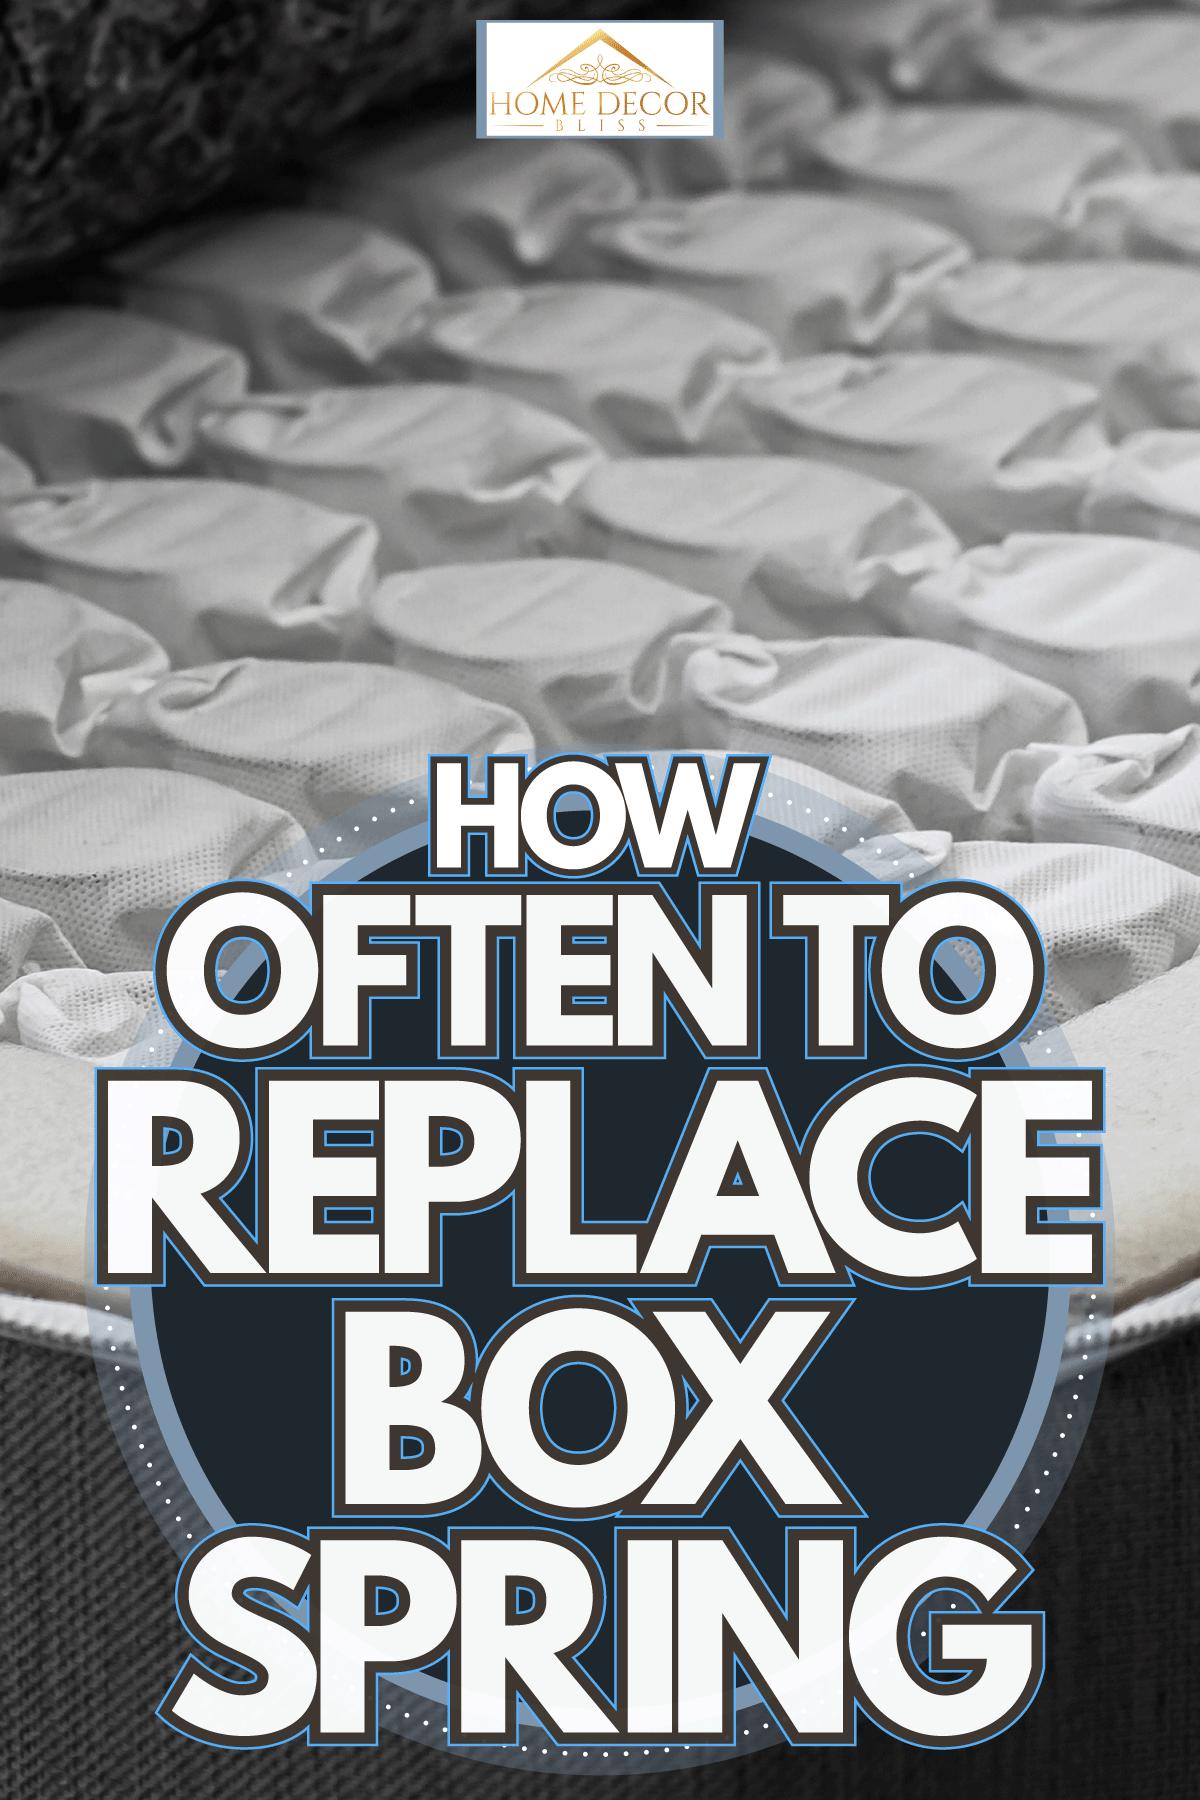 A box spring mattress, How Often To Replace Box Spring